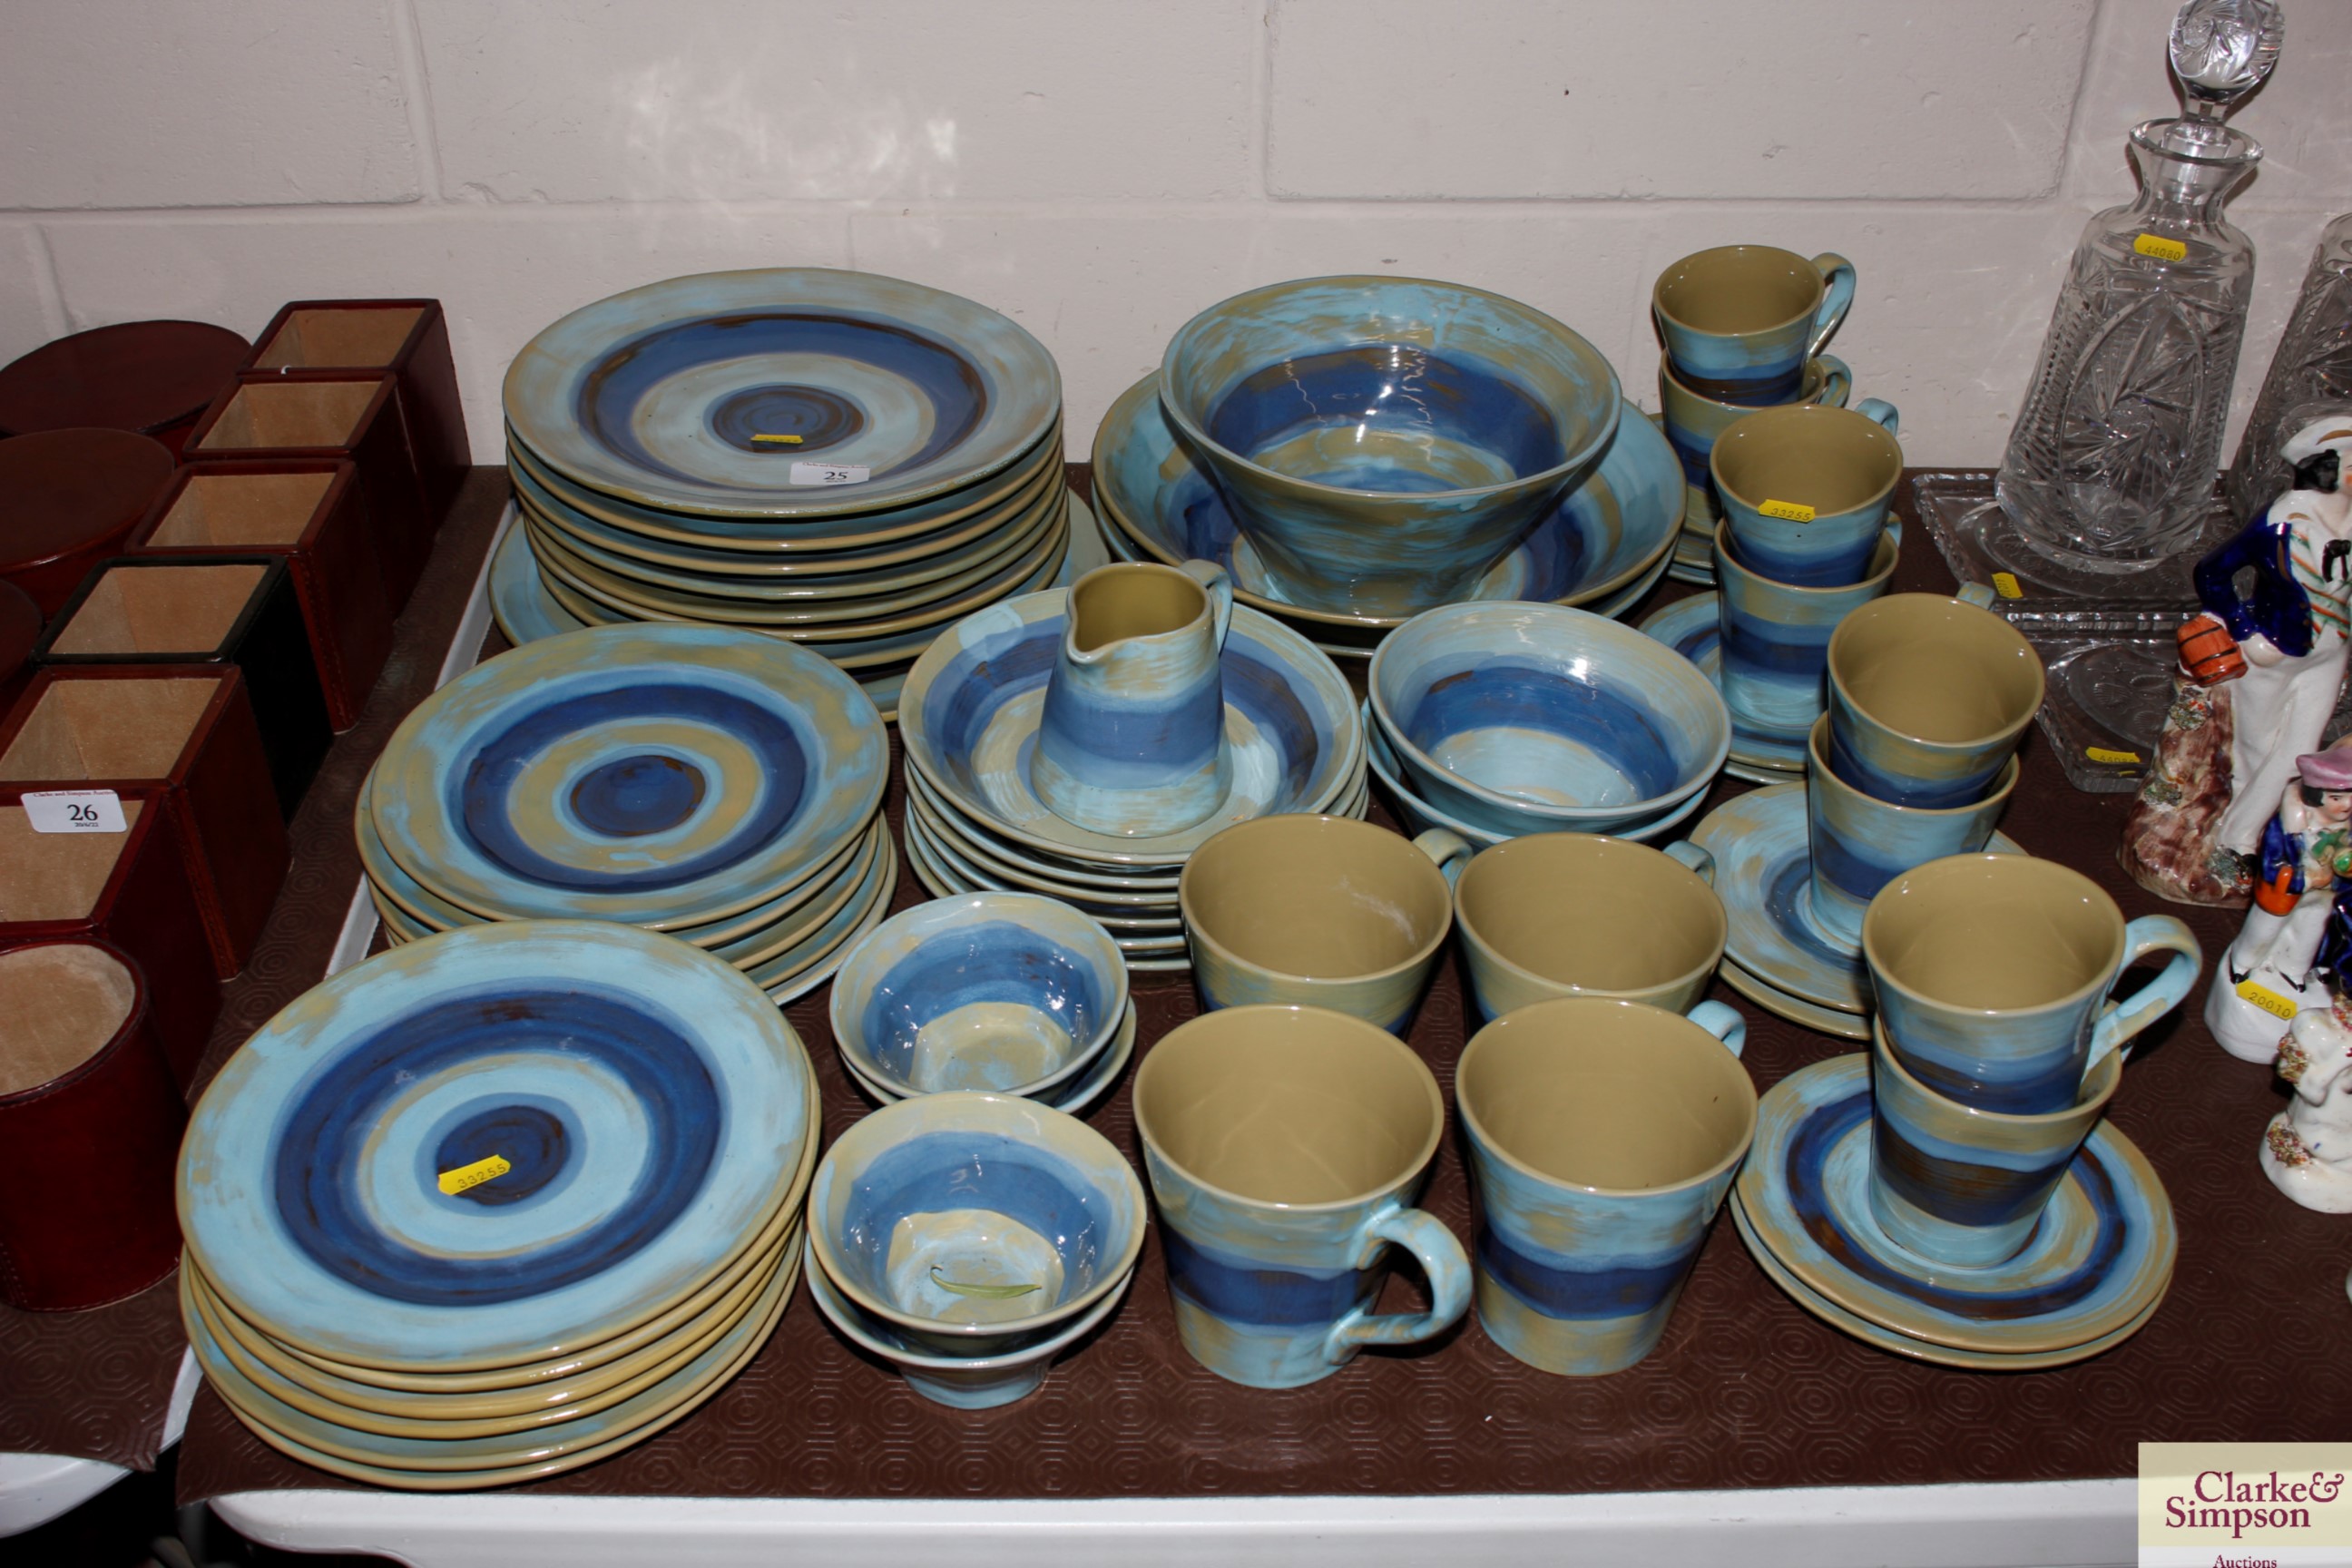 A quantity of pottery dinner and teaware